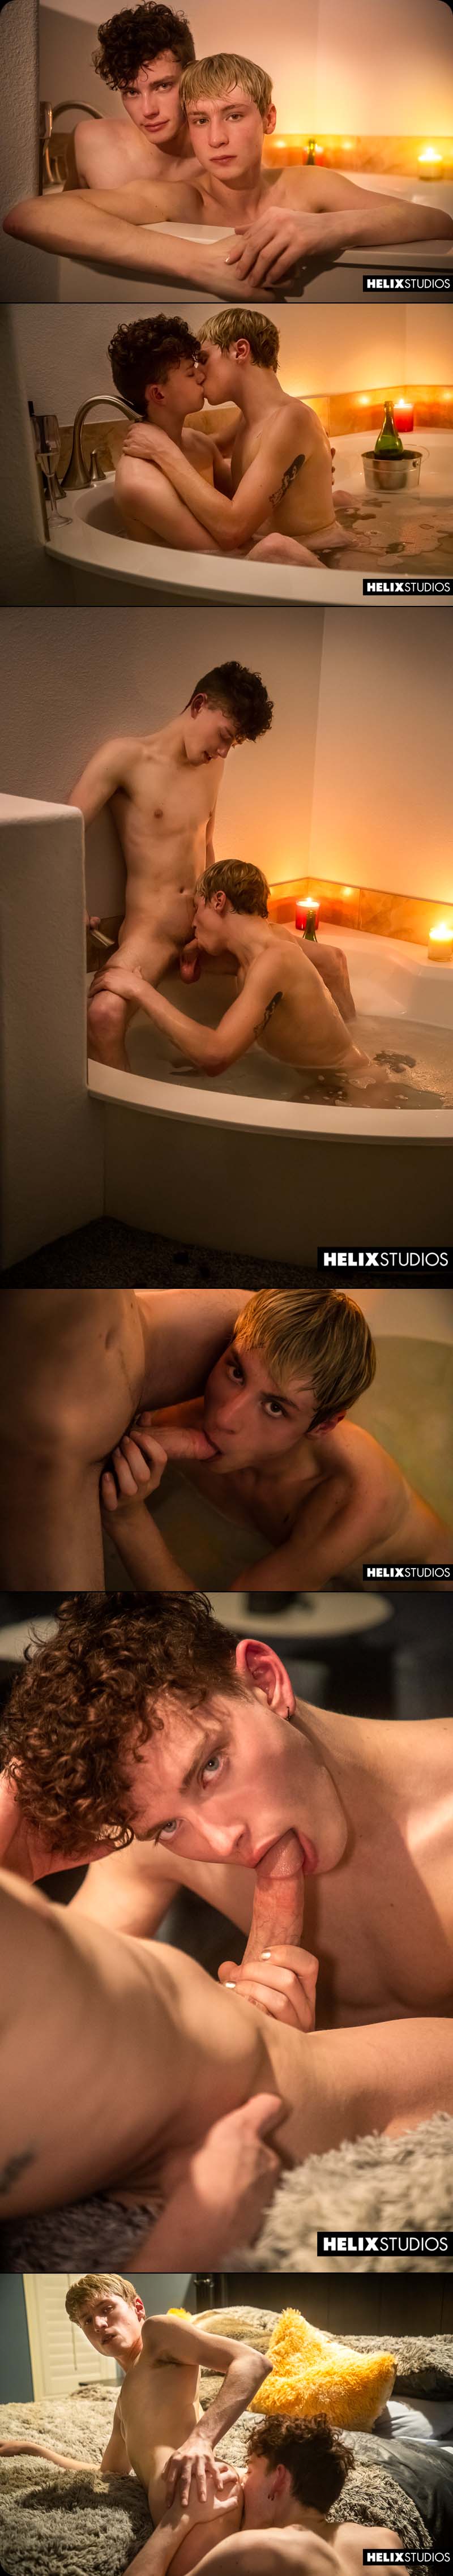 Let's Hit It, Part 1: Seriously? (Chase Williams and Spencer Locke Flip-Fuck) at HelixStudios